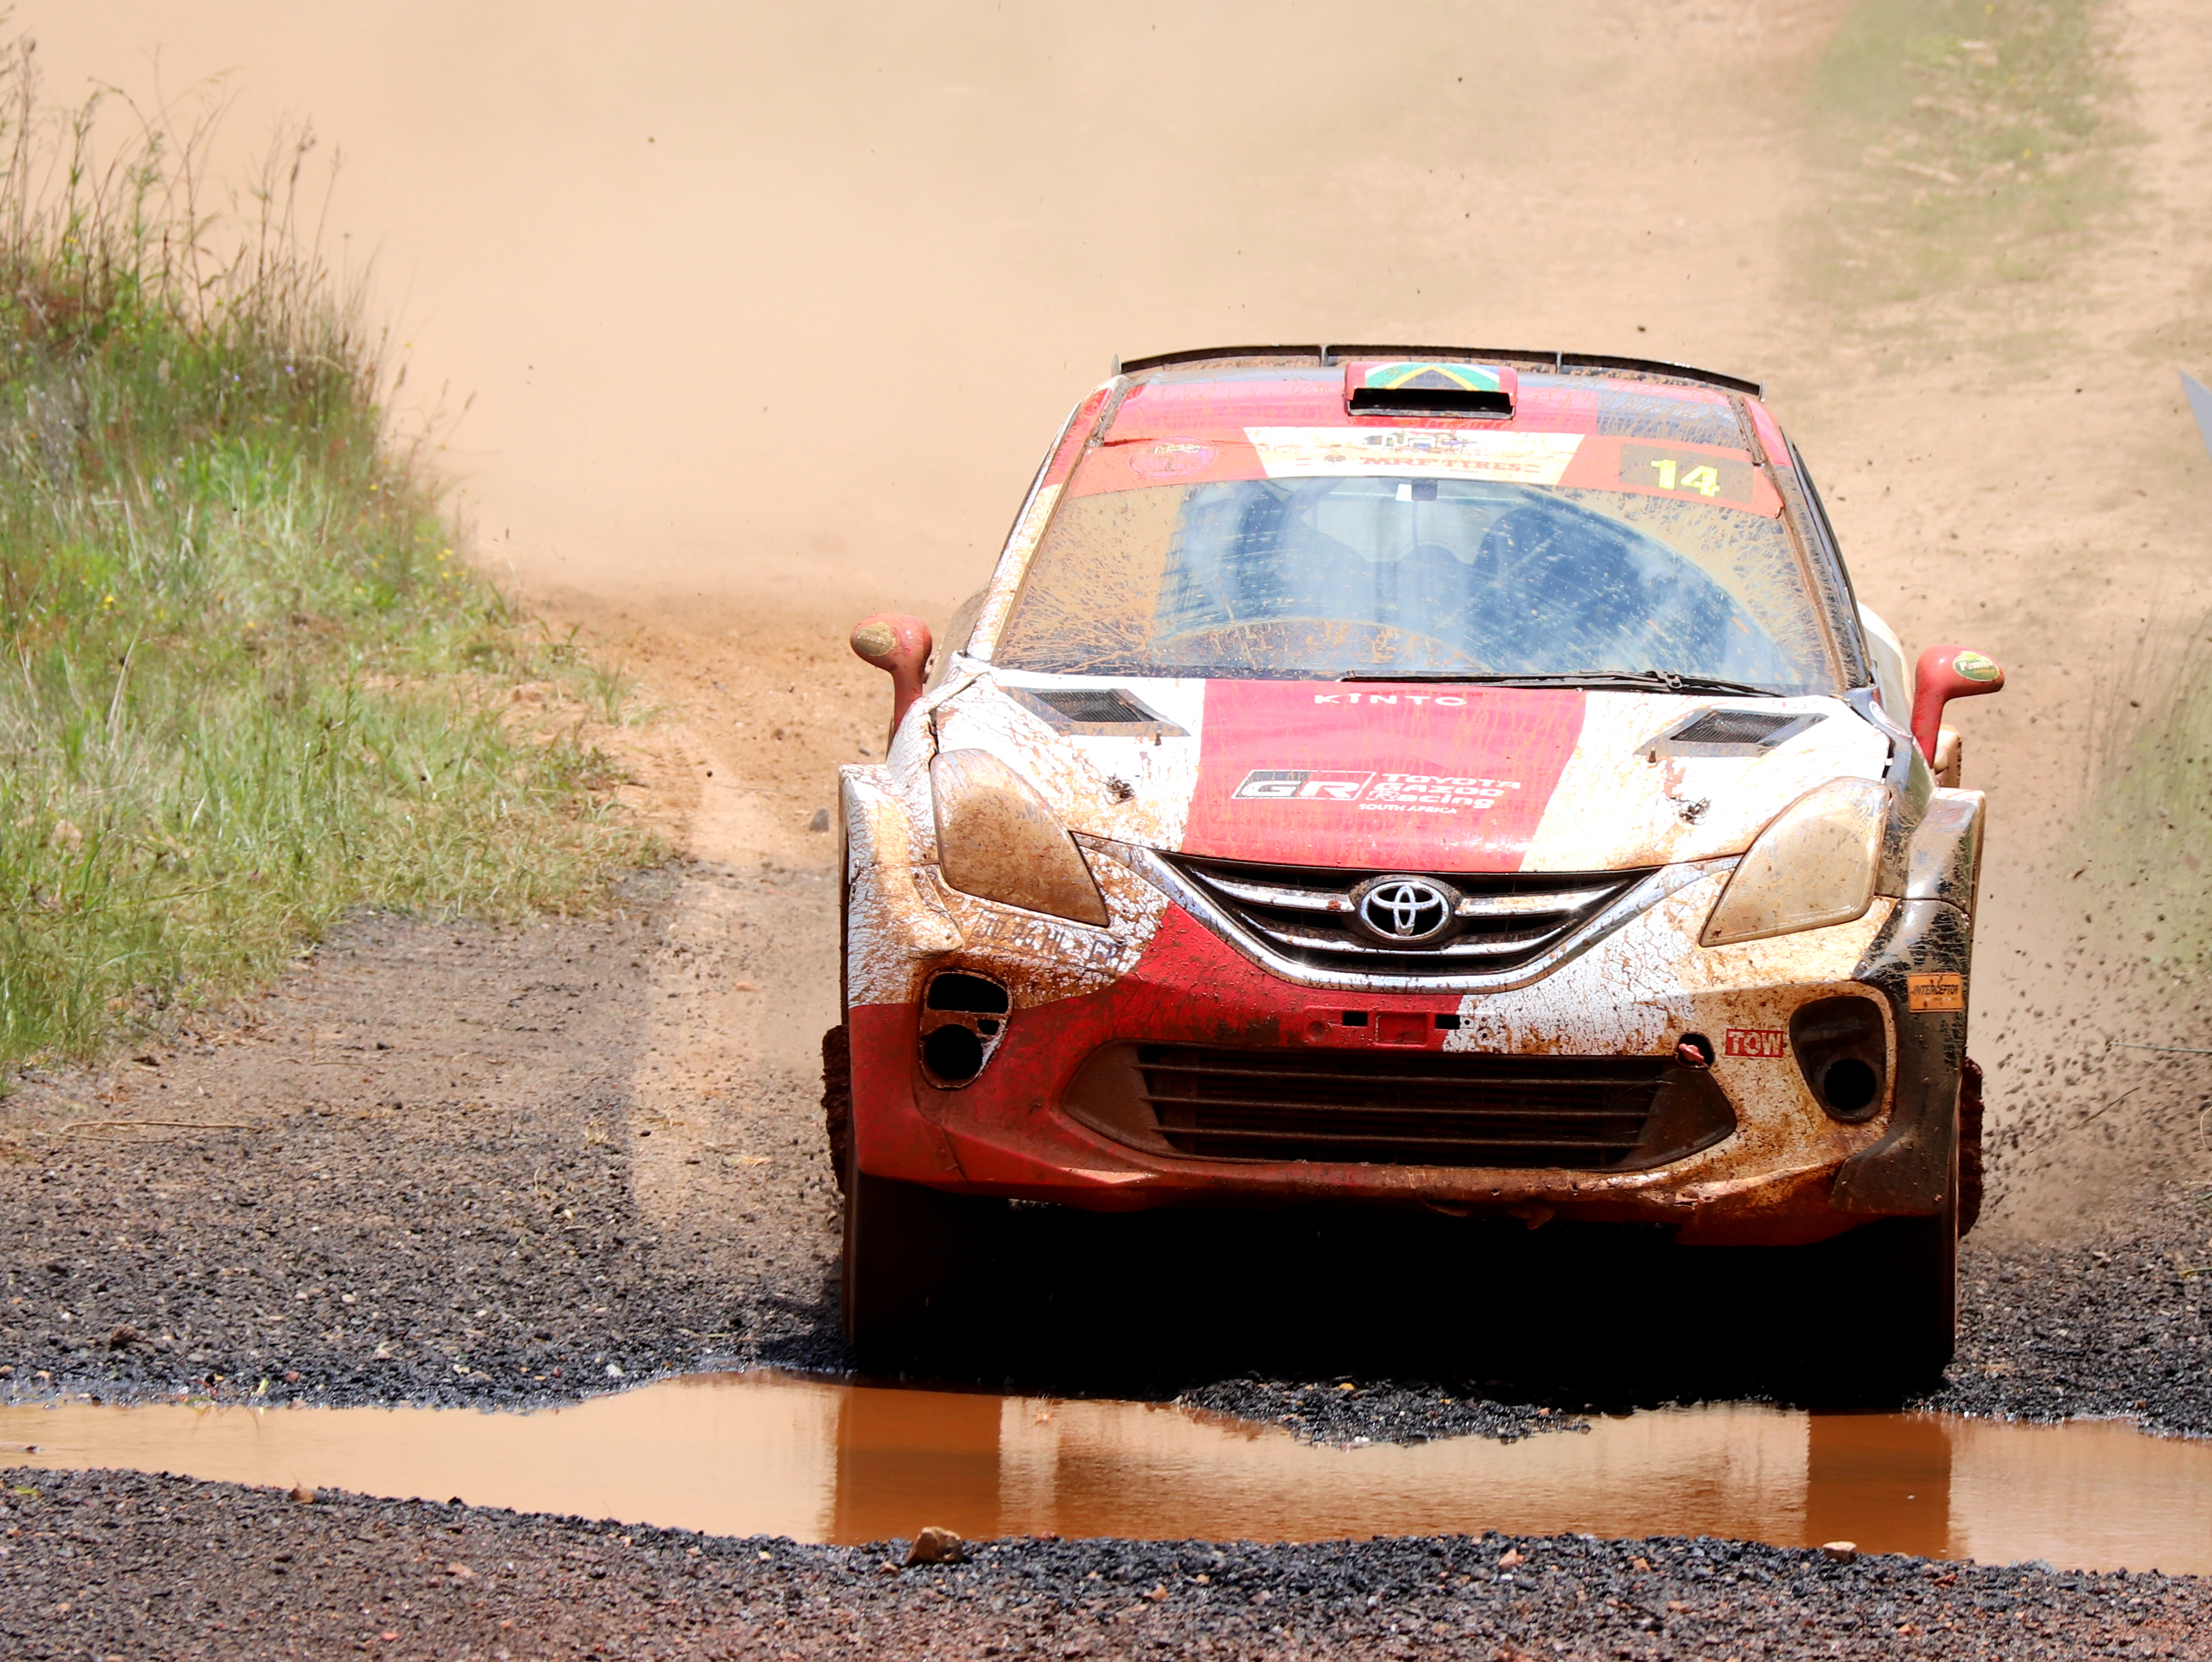 The Toyota Starlet racing through a mud pool on a rally track full of mud